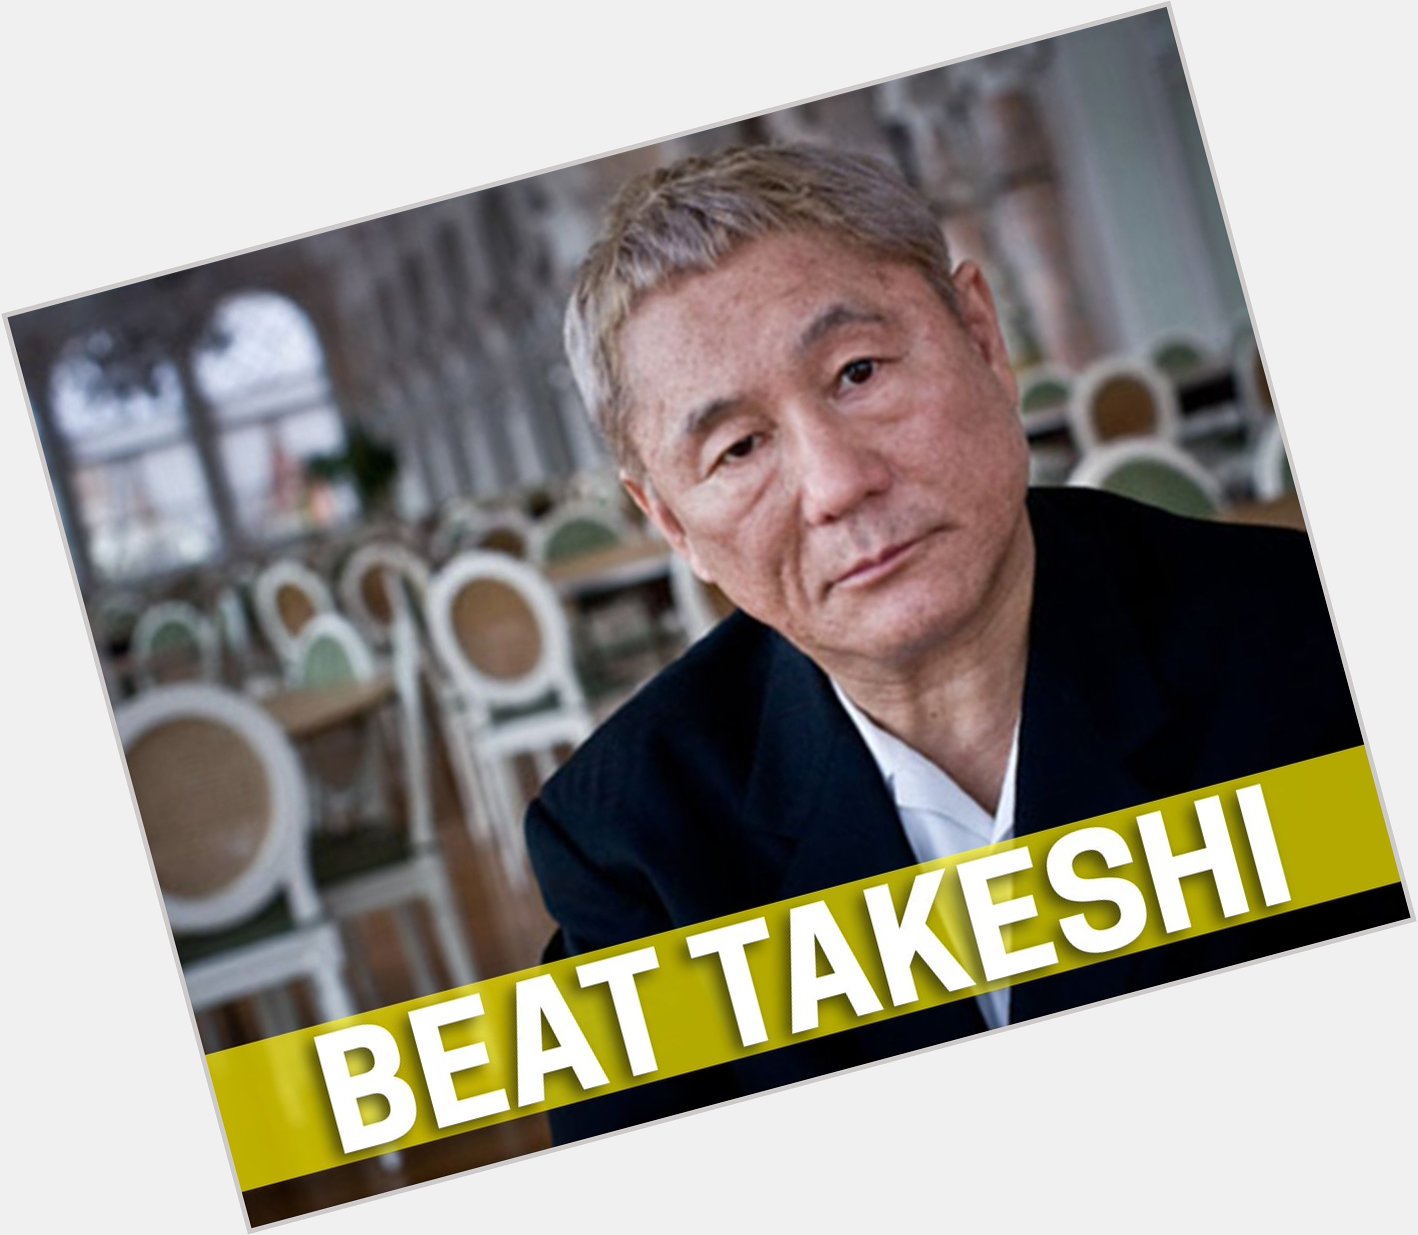 1/18 Happy birthday to the coolest man in the world, Takeshi Kitano! 